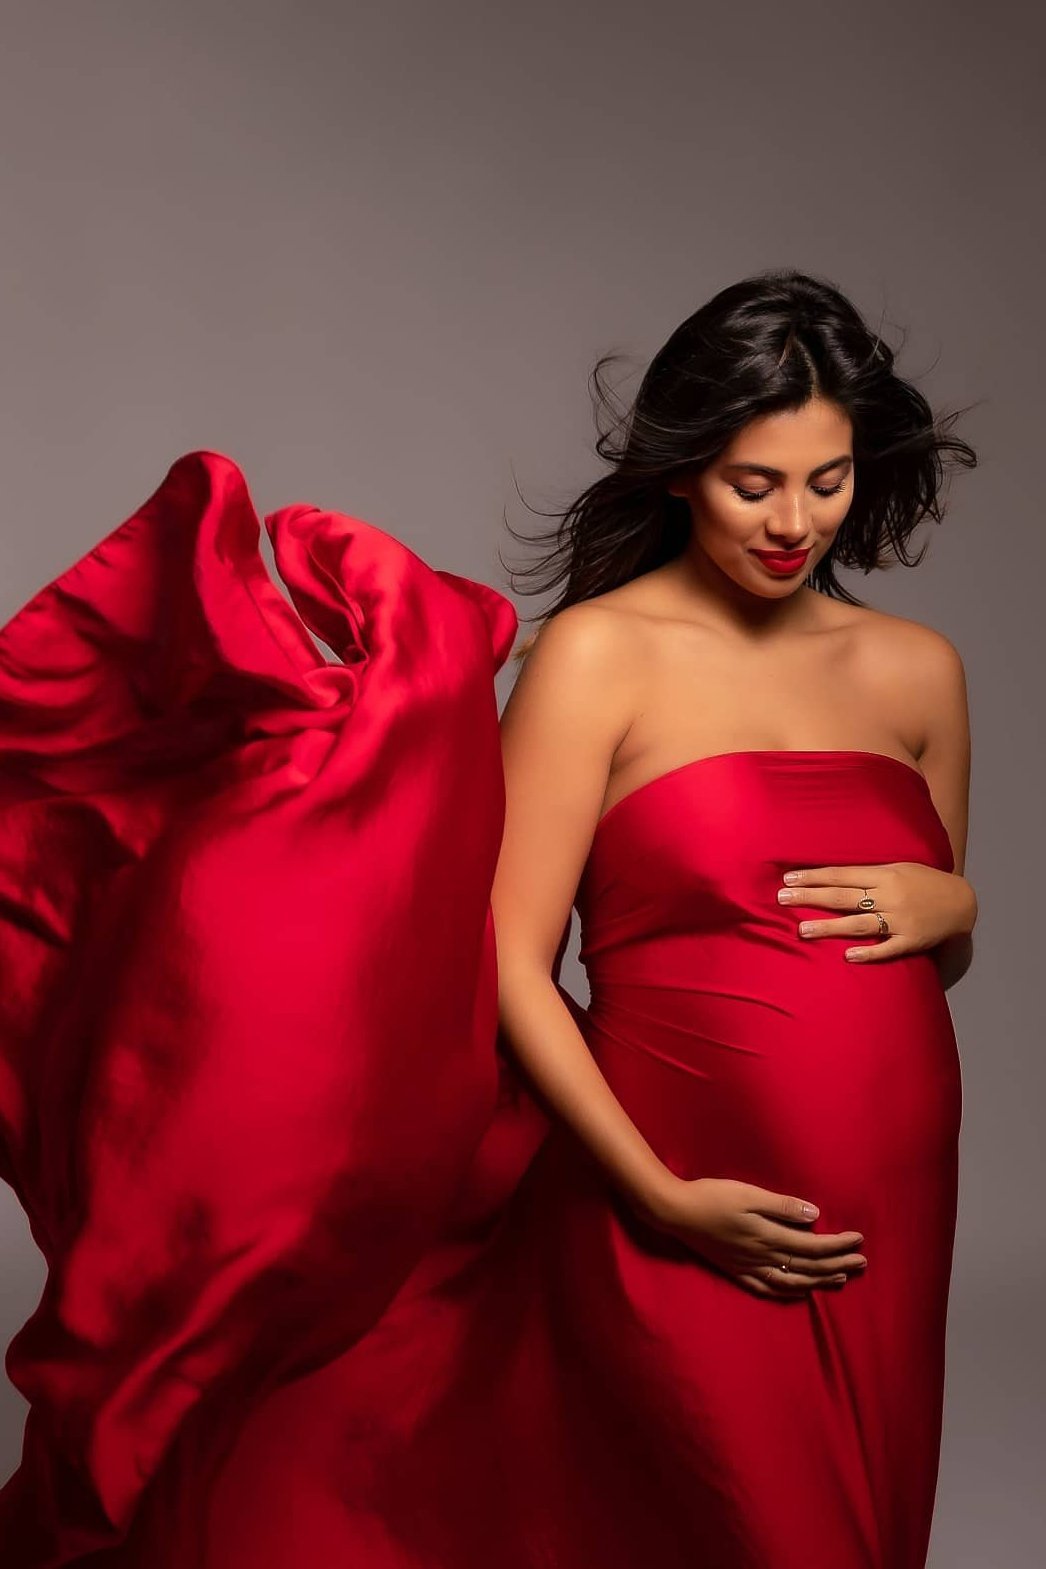 Brunette model poses with her eyes closed touching her bump. She is wearing a vibrant red long silky fabric. 